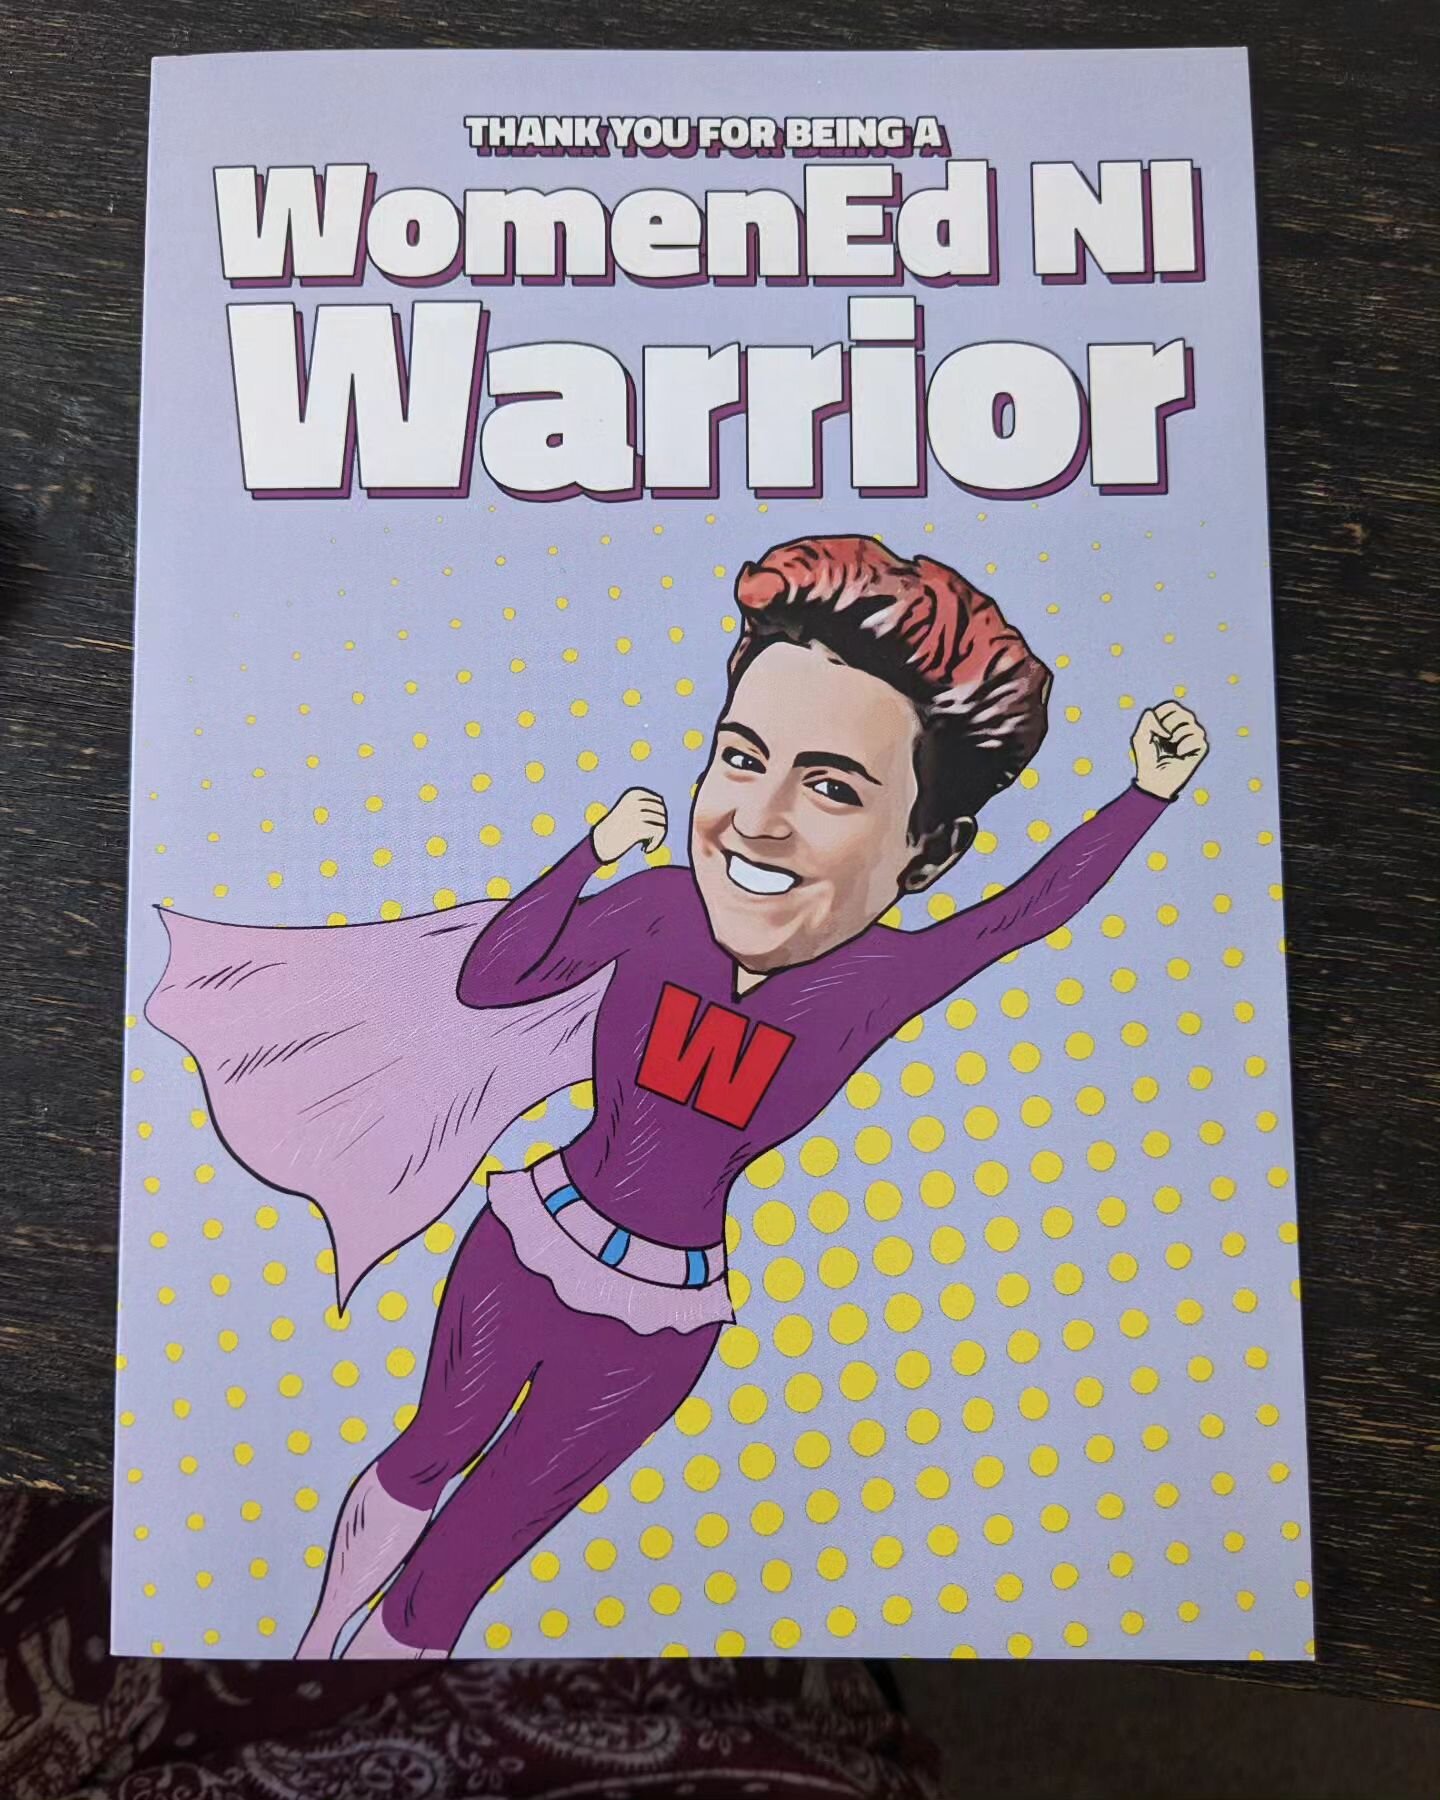 Thanks @womenedleaders for making me a super hero! What a great thank you card to receive in the post! 

I am nothing but happy and proud to be a tiny part of this. 

I love what these amazing women are creating to empower, educate, connect and suppo